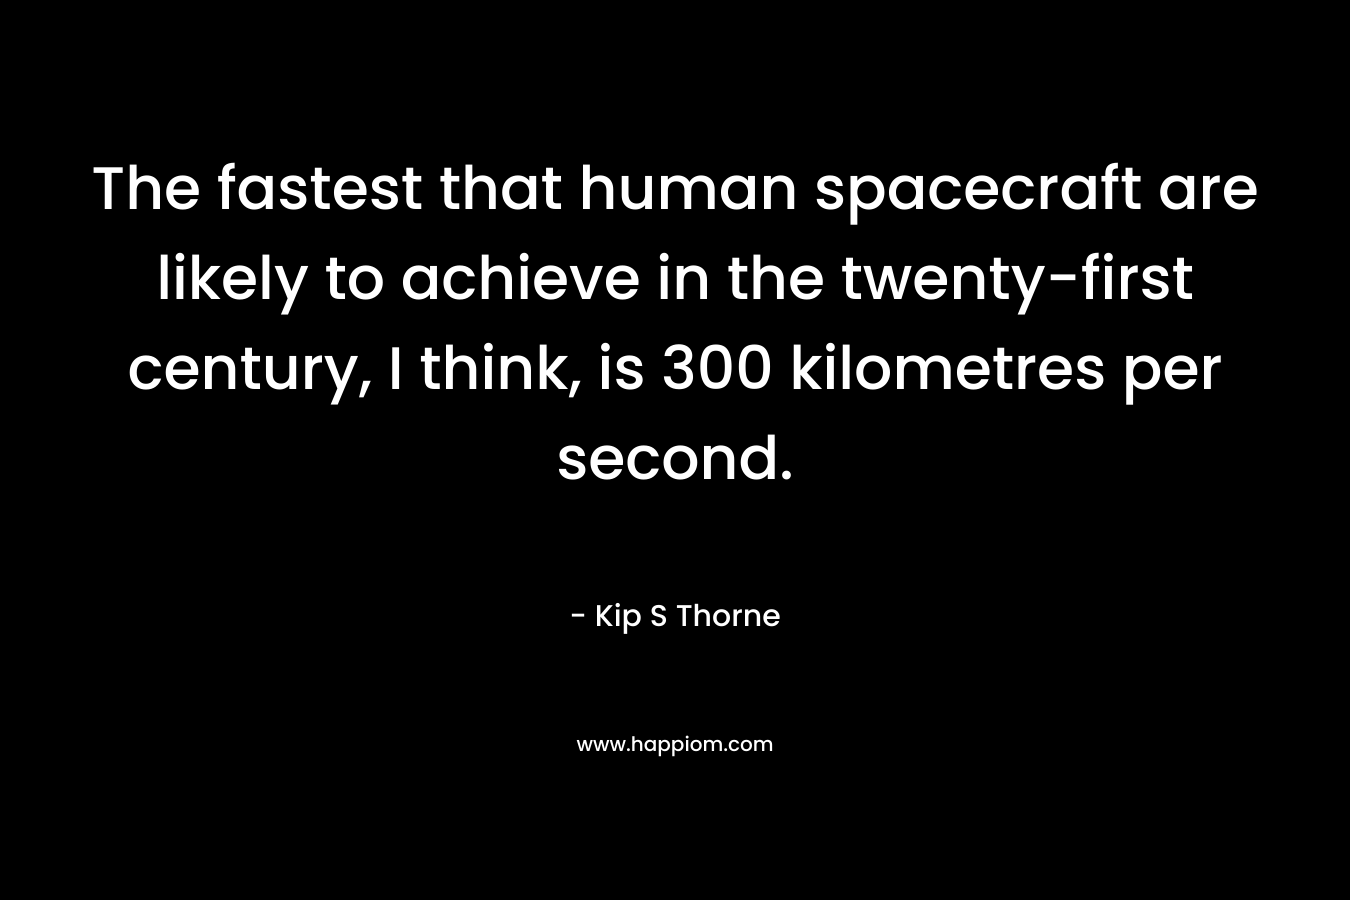 The fastest that human spacecraft are likely to achieve in the twenty-first century, I think, is 300 kilometres per second. – Kip S Thorne